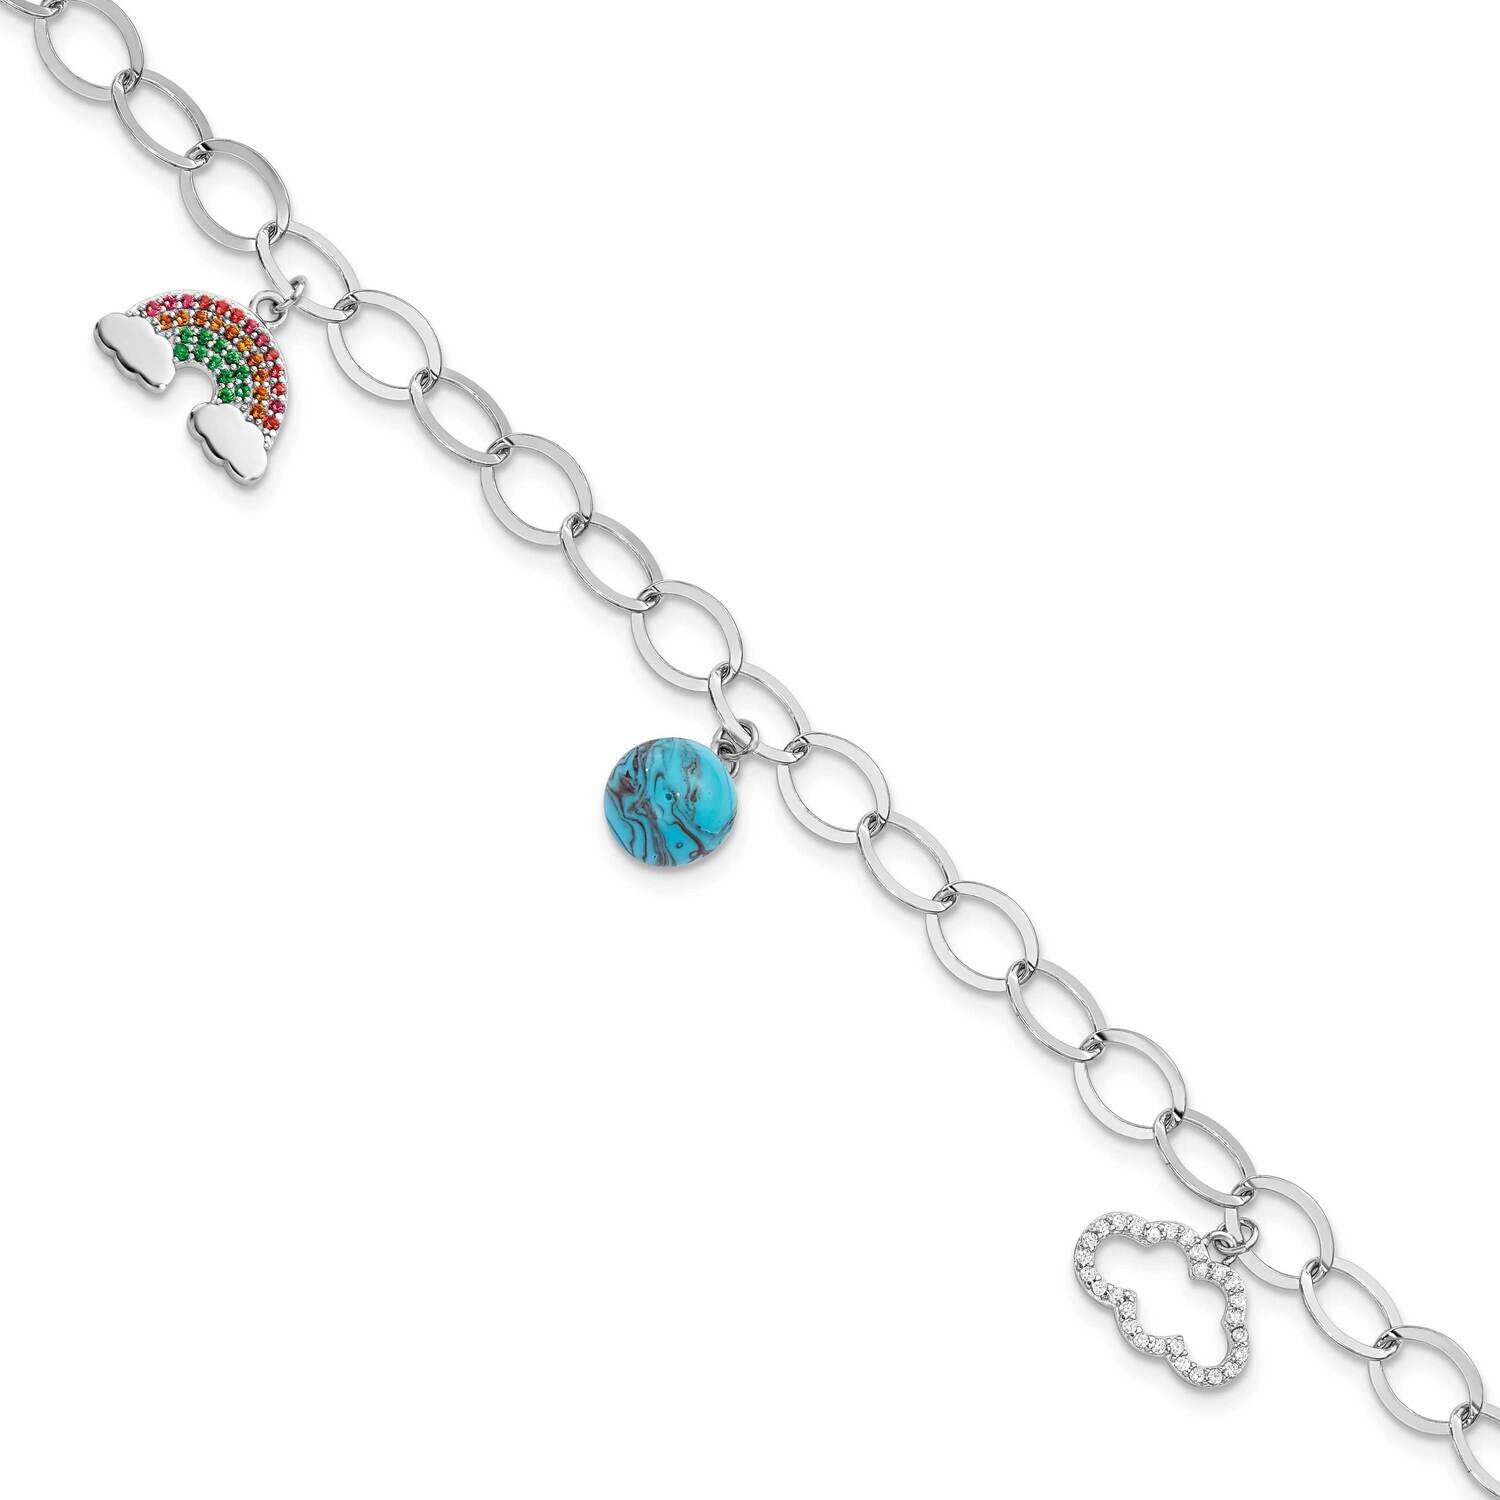 8 Inch Rh-Plated Multi-Color Nano Crystal Turquoise Bracelet Sterling Silver QG5916-8